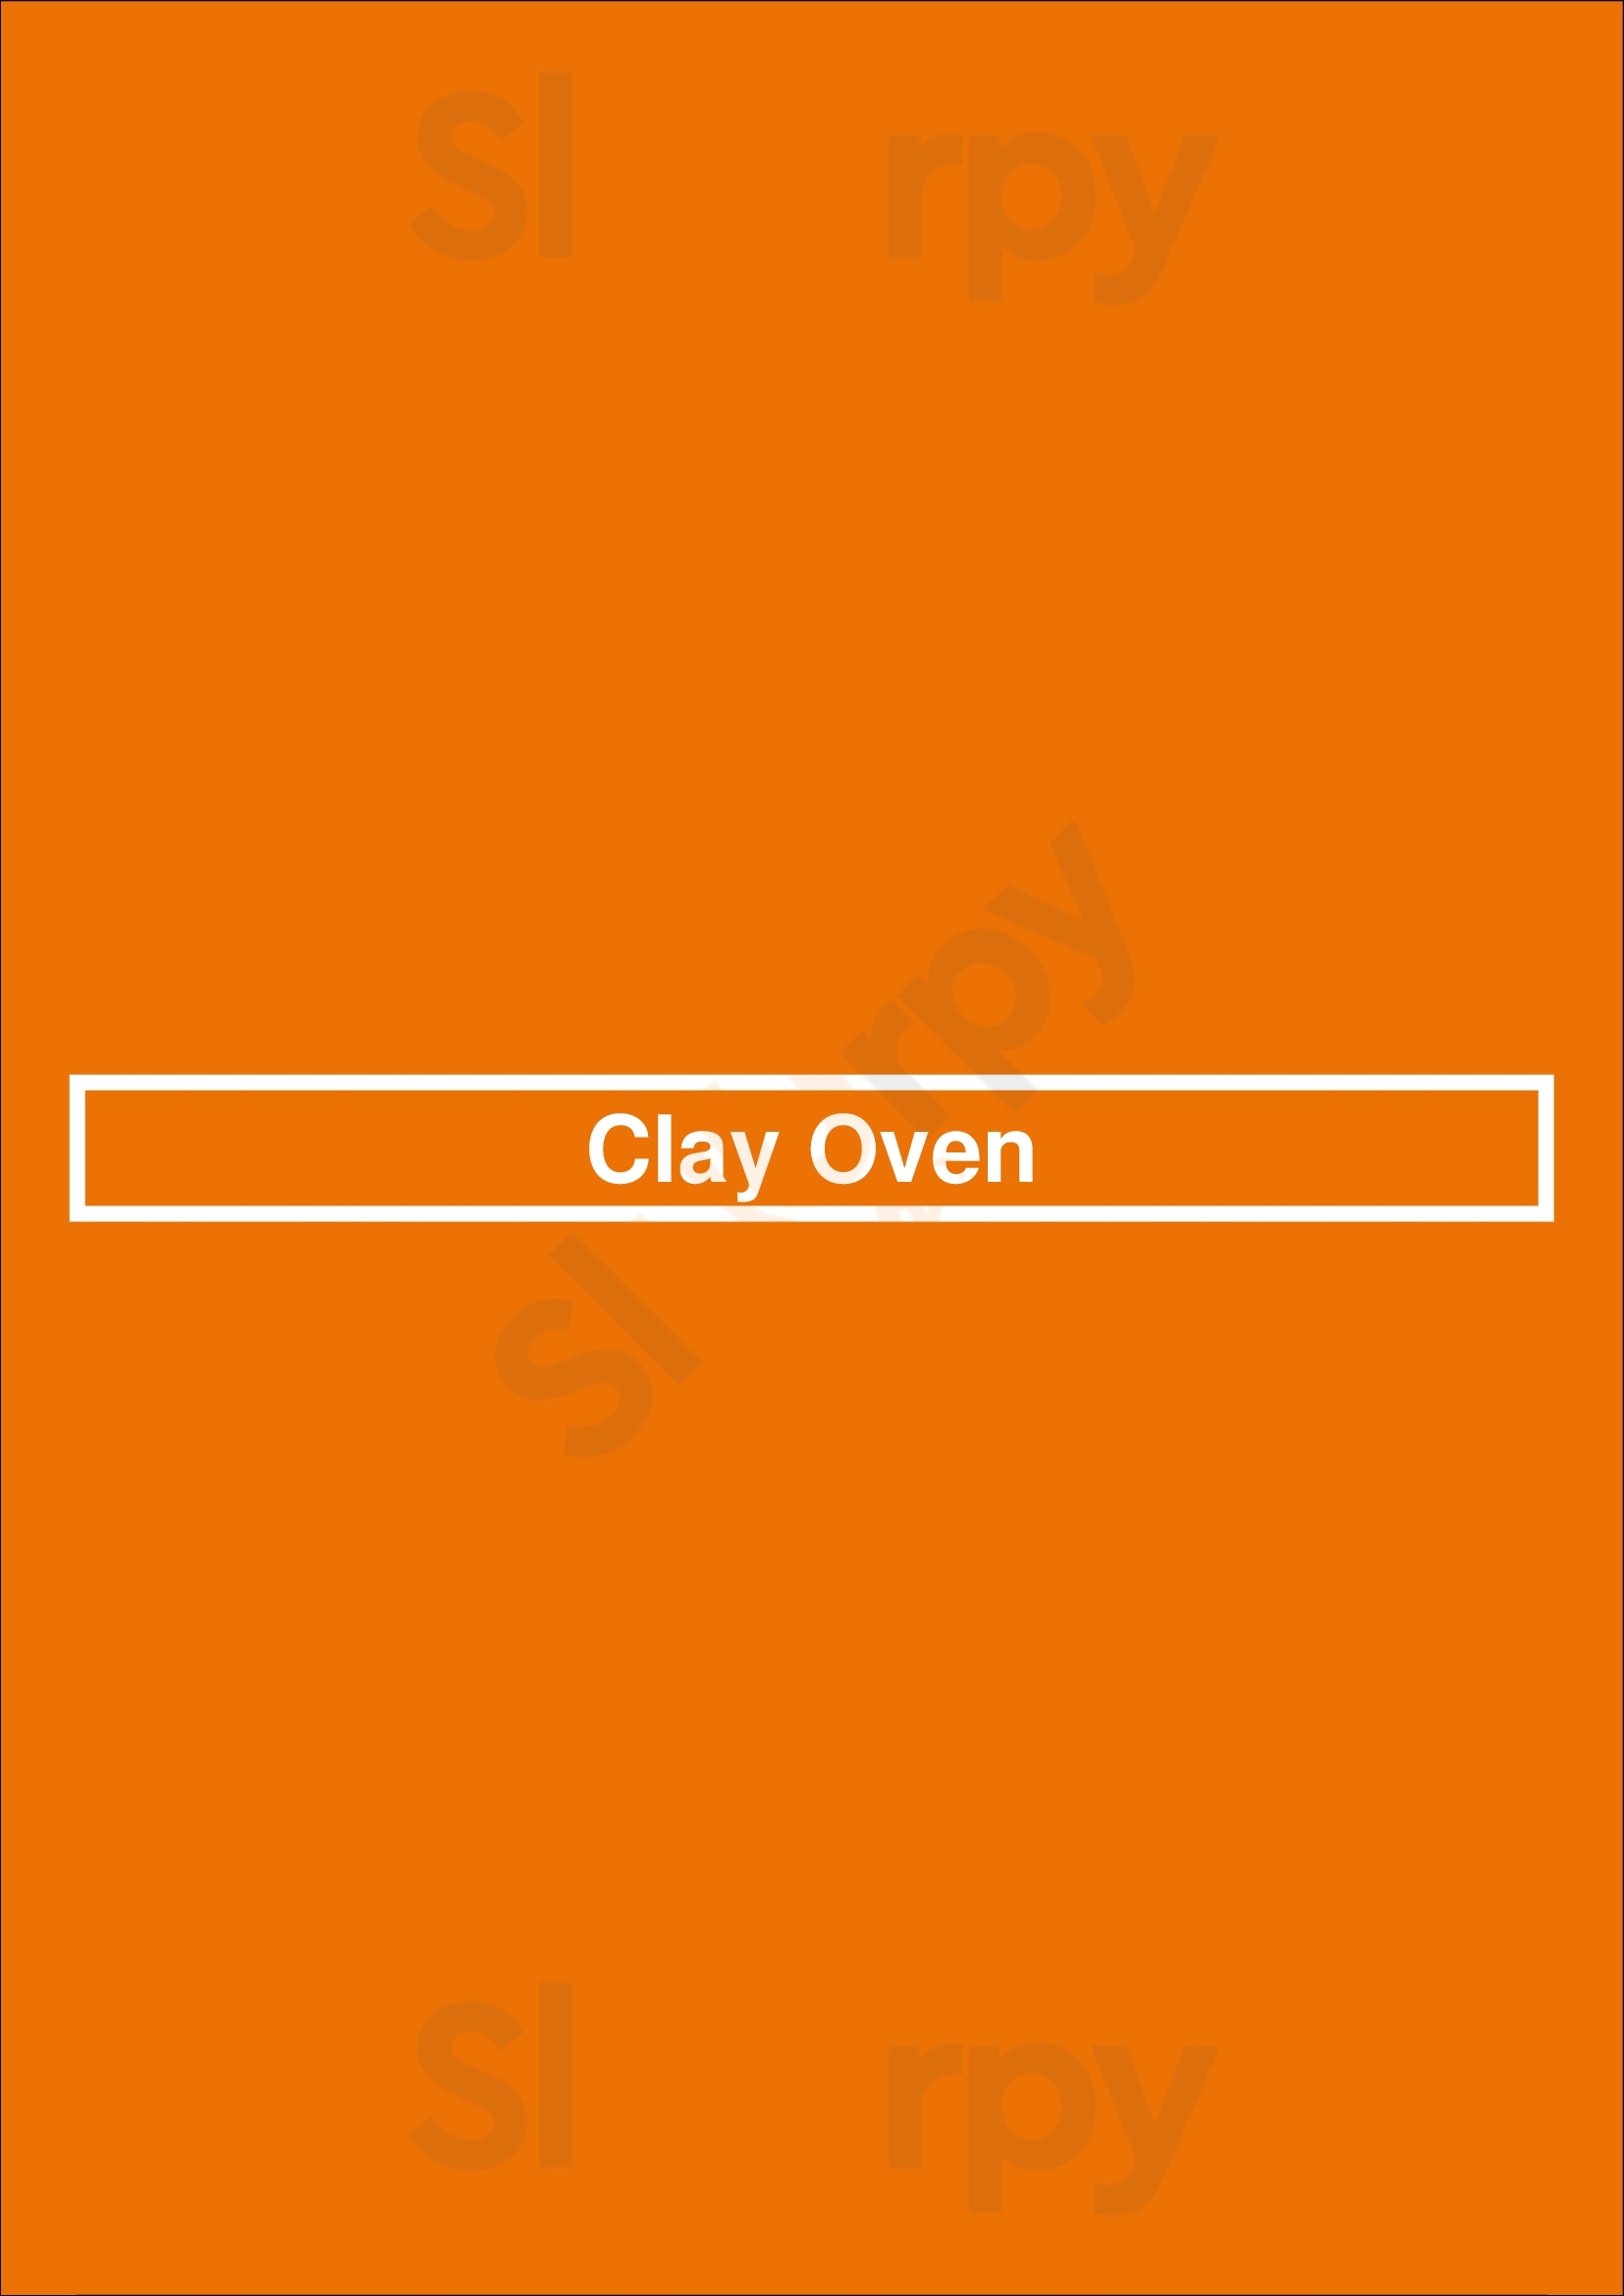 Clay Oven Eastbourne Menu - 1